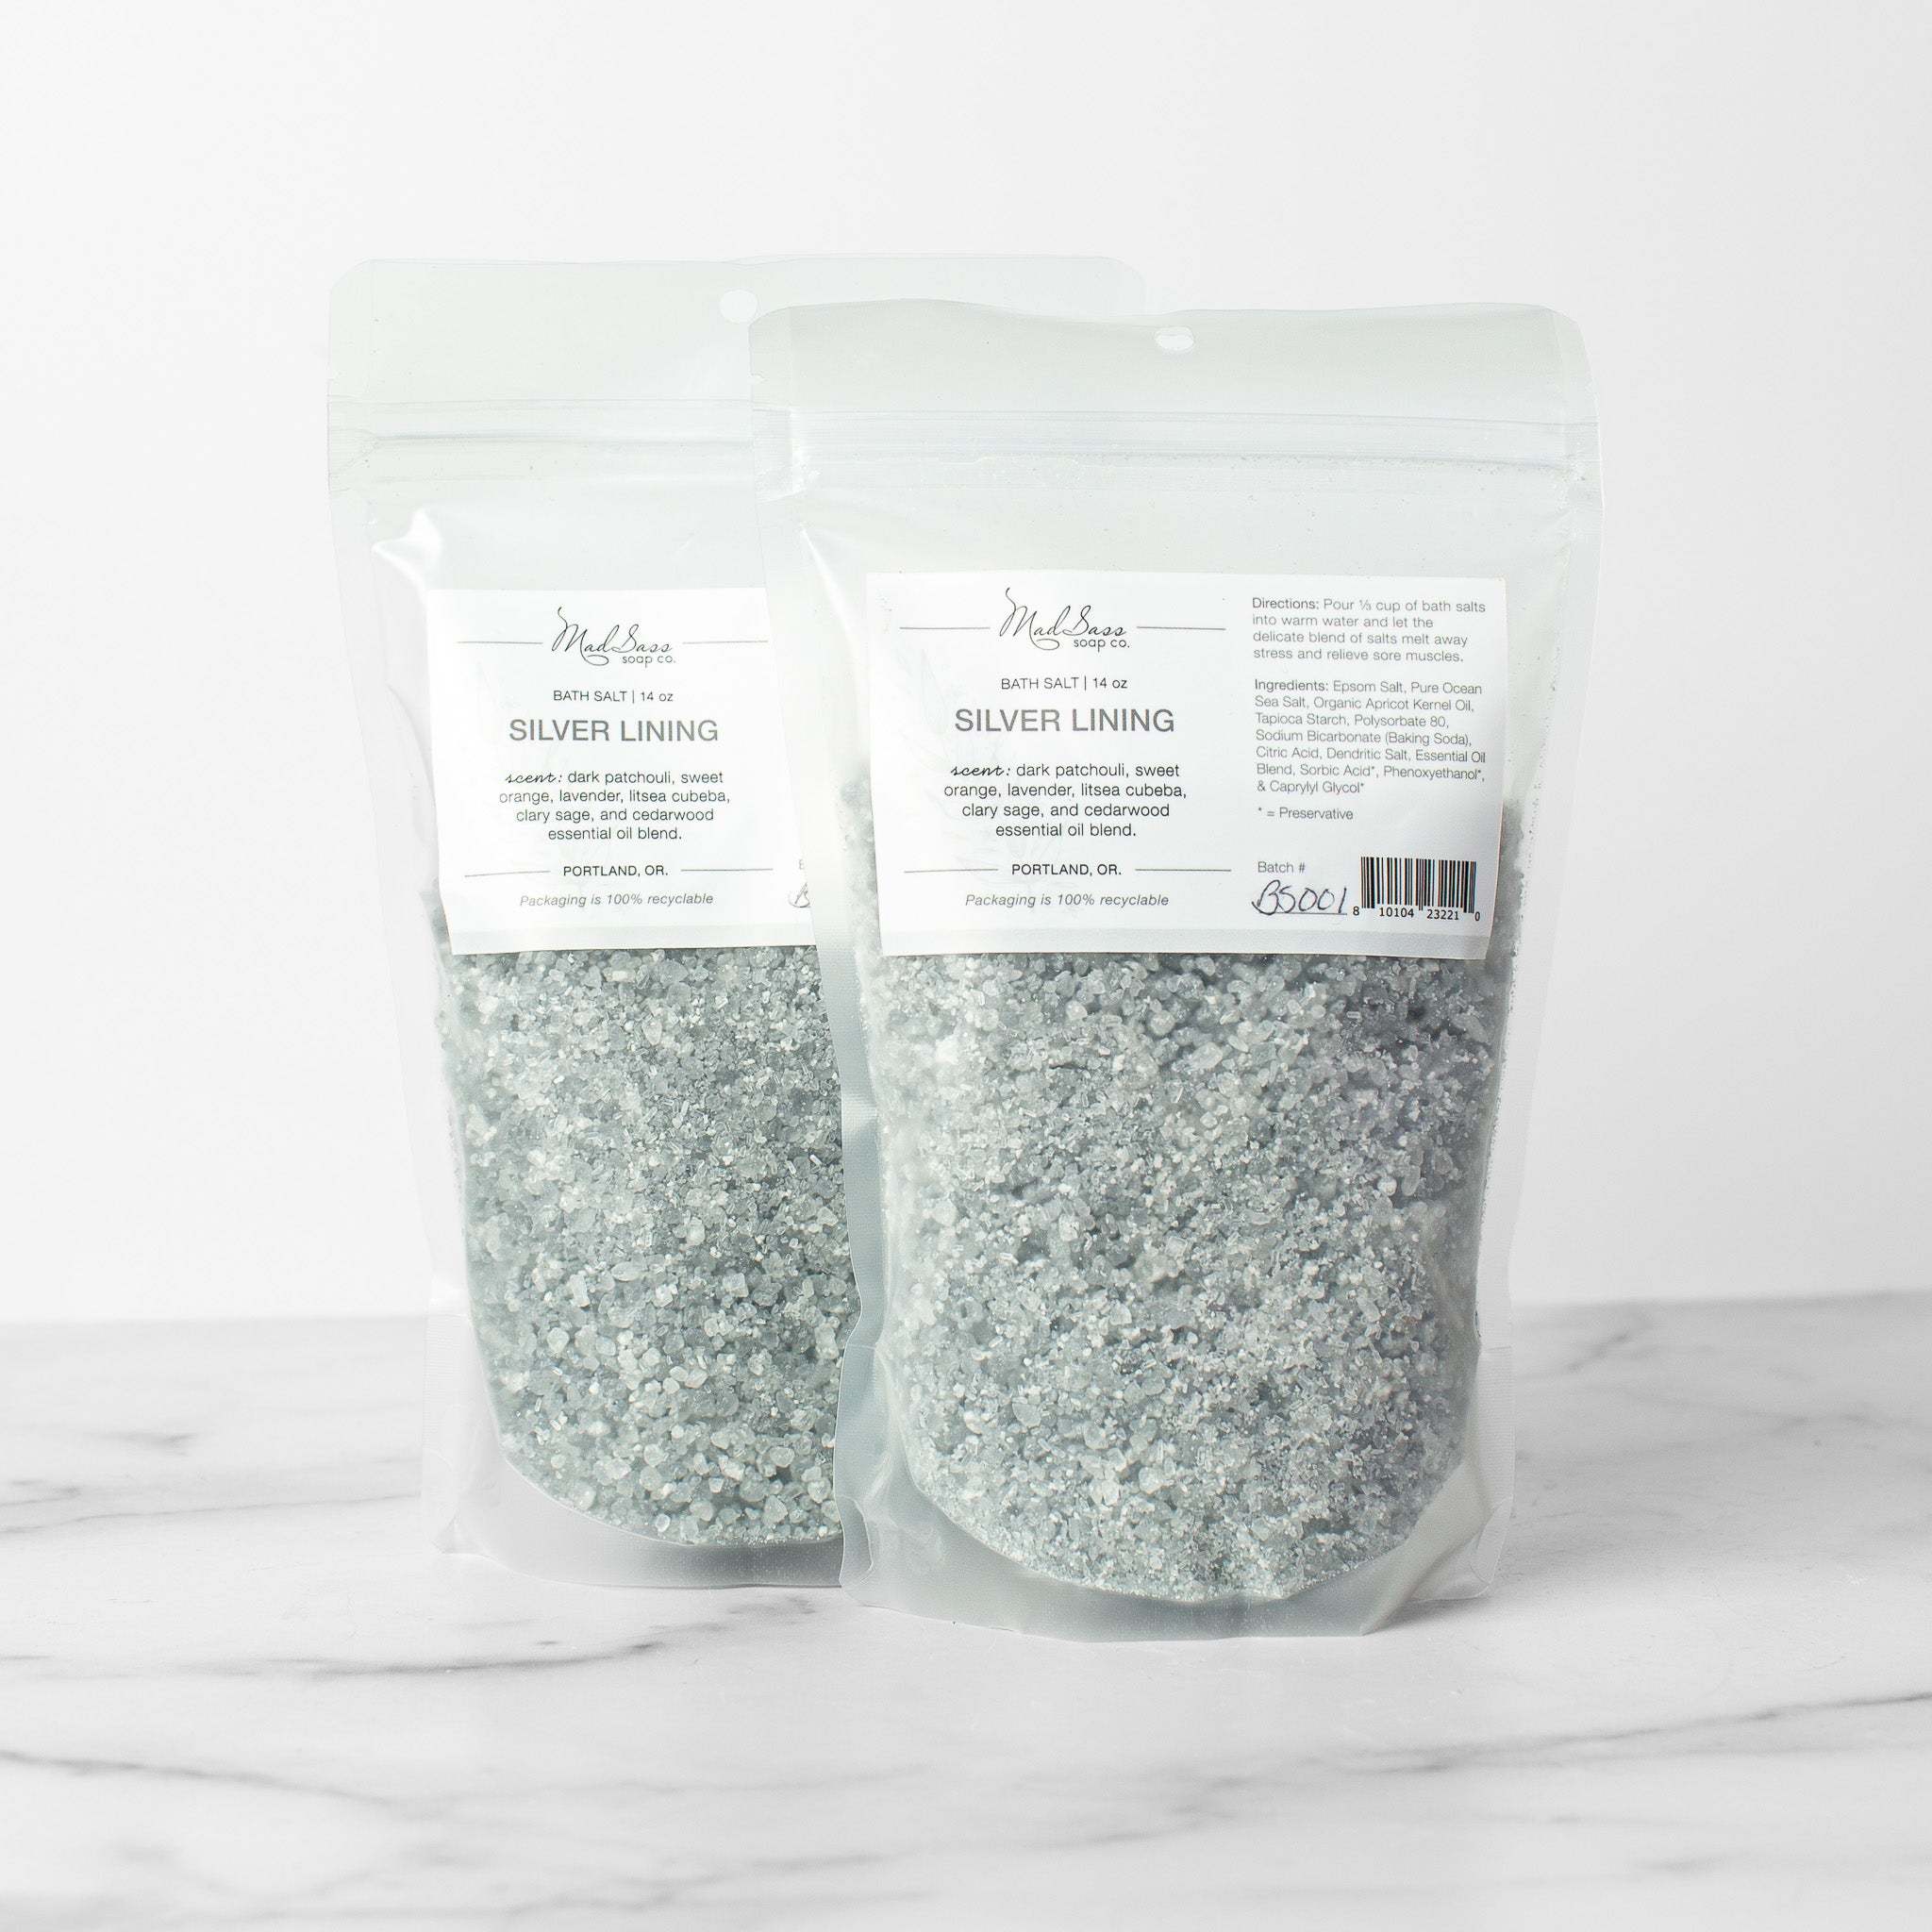 Two bags of Silver Lining bath salts on a white background. Silver Lining is a mixed grey and white bath salt.